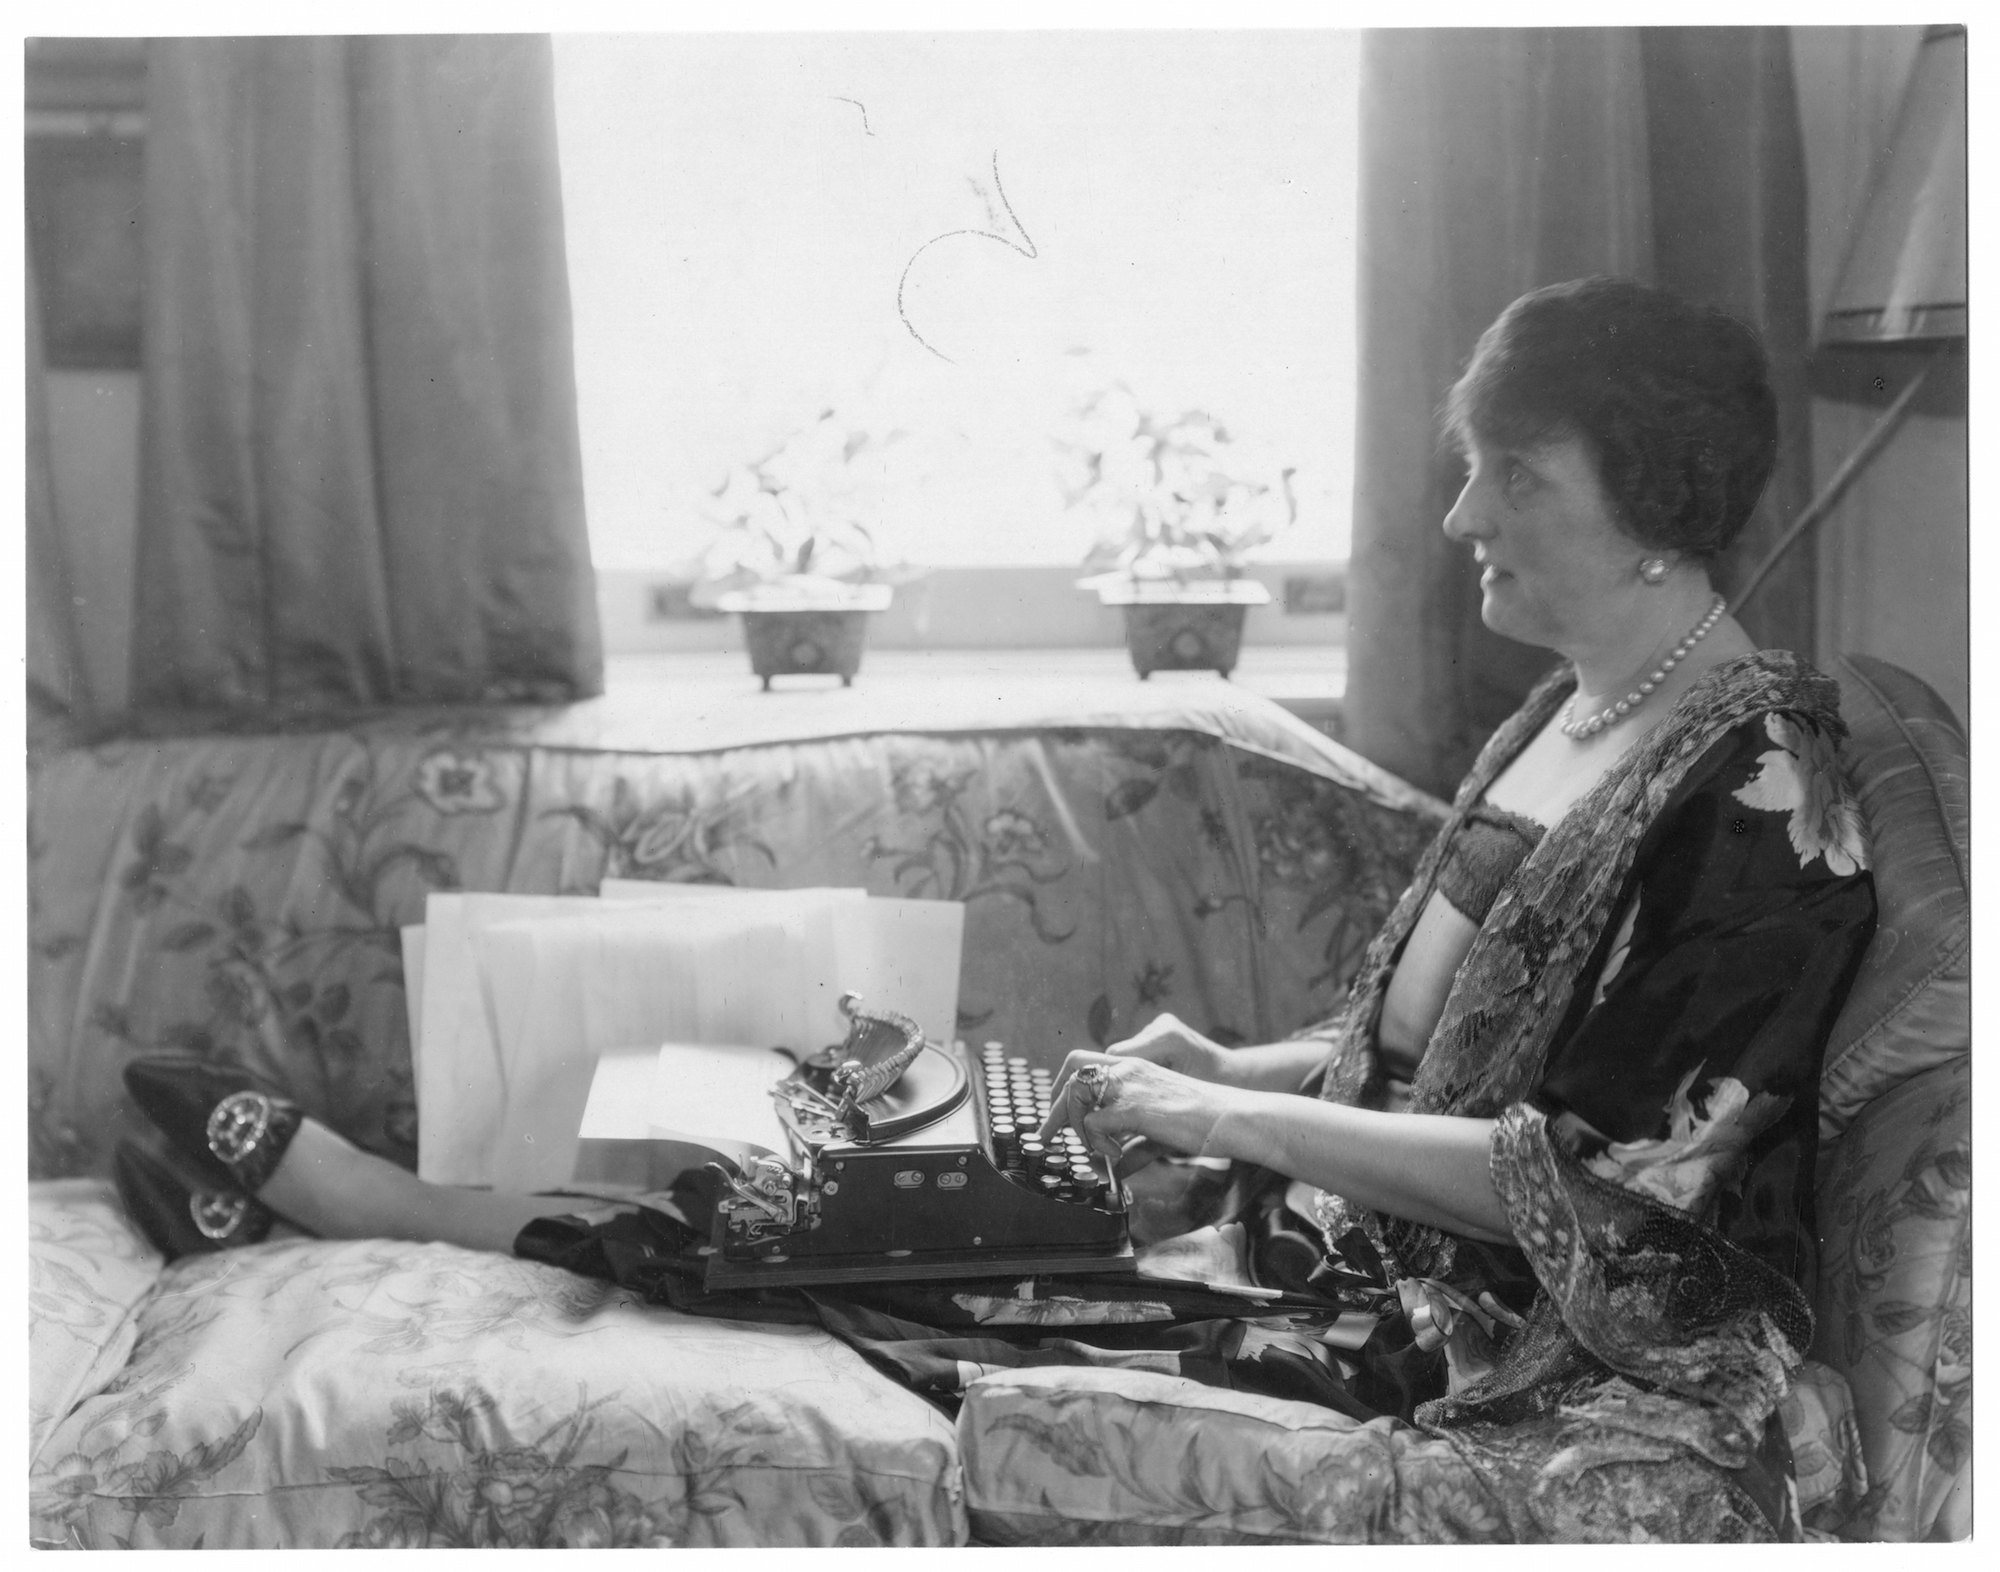 Etiquette author Emily Post, in pearls and flowing robe, sitting lengthwise on couch with legs stretched out, typewriter in her lap, 1927. (Jessie Tarbox Beals/The New York Historical Society/Getty Images)